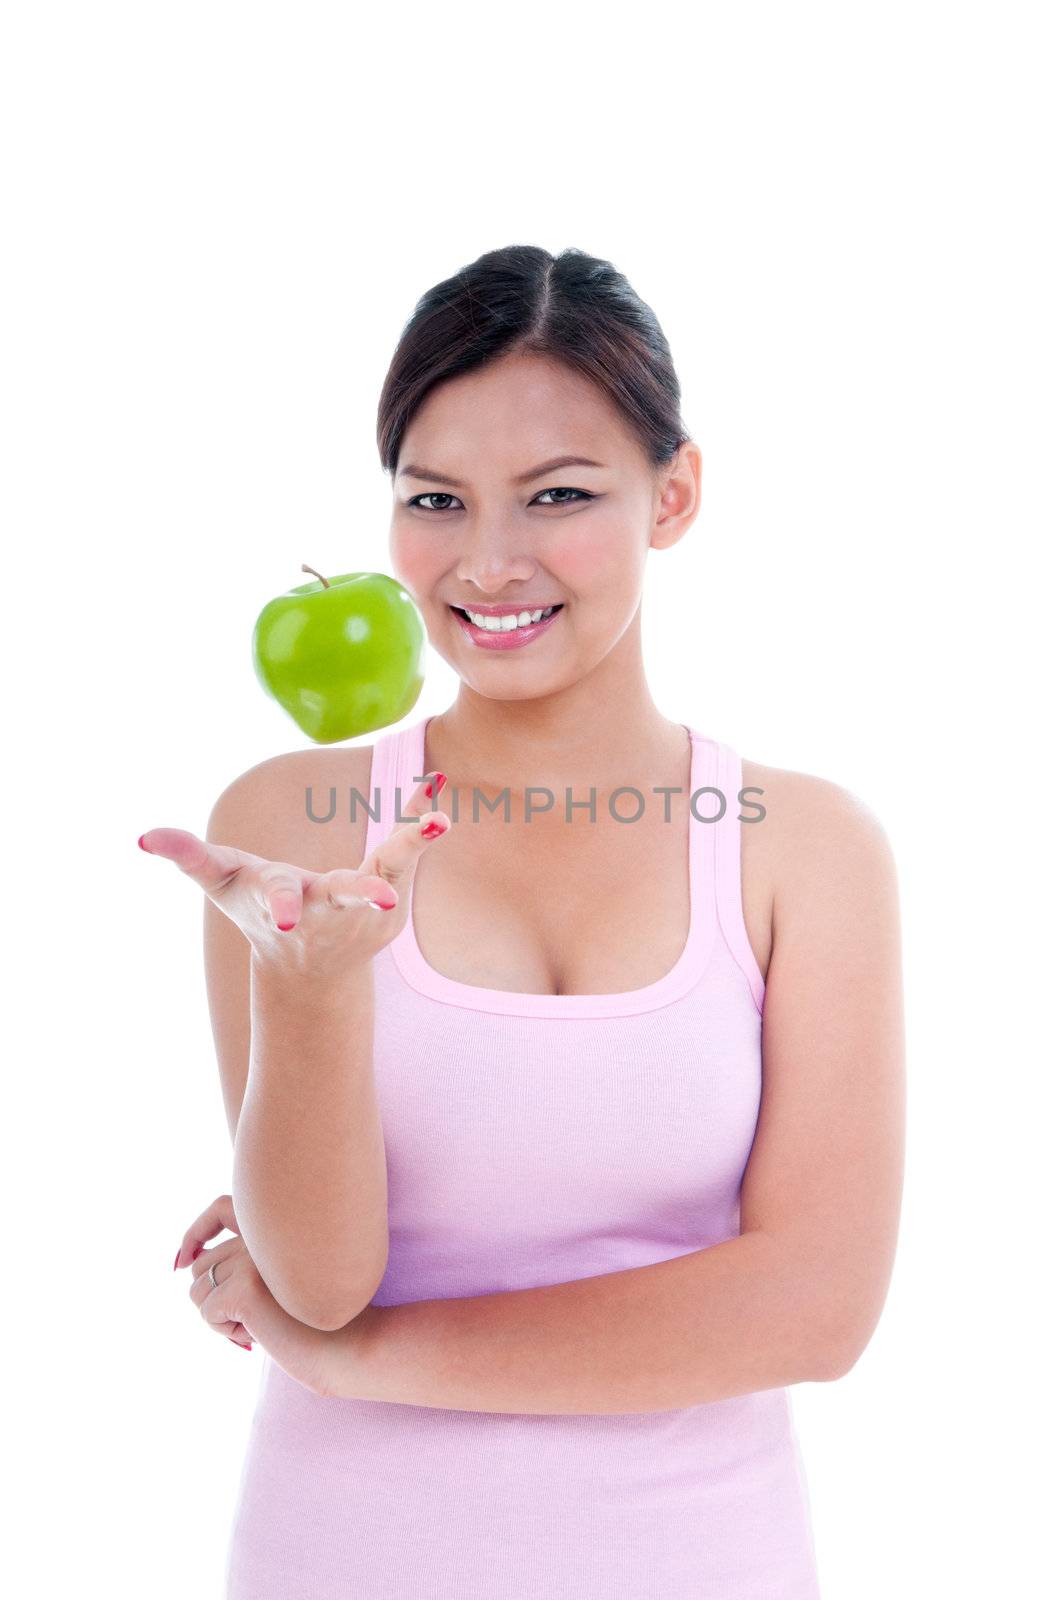 Portrait of a young healthy woman playing with green apple over white background.